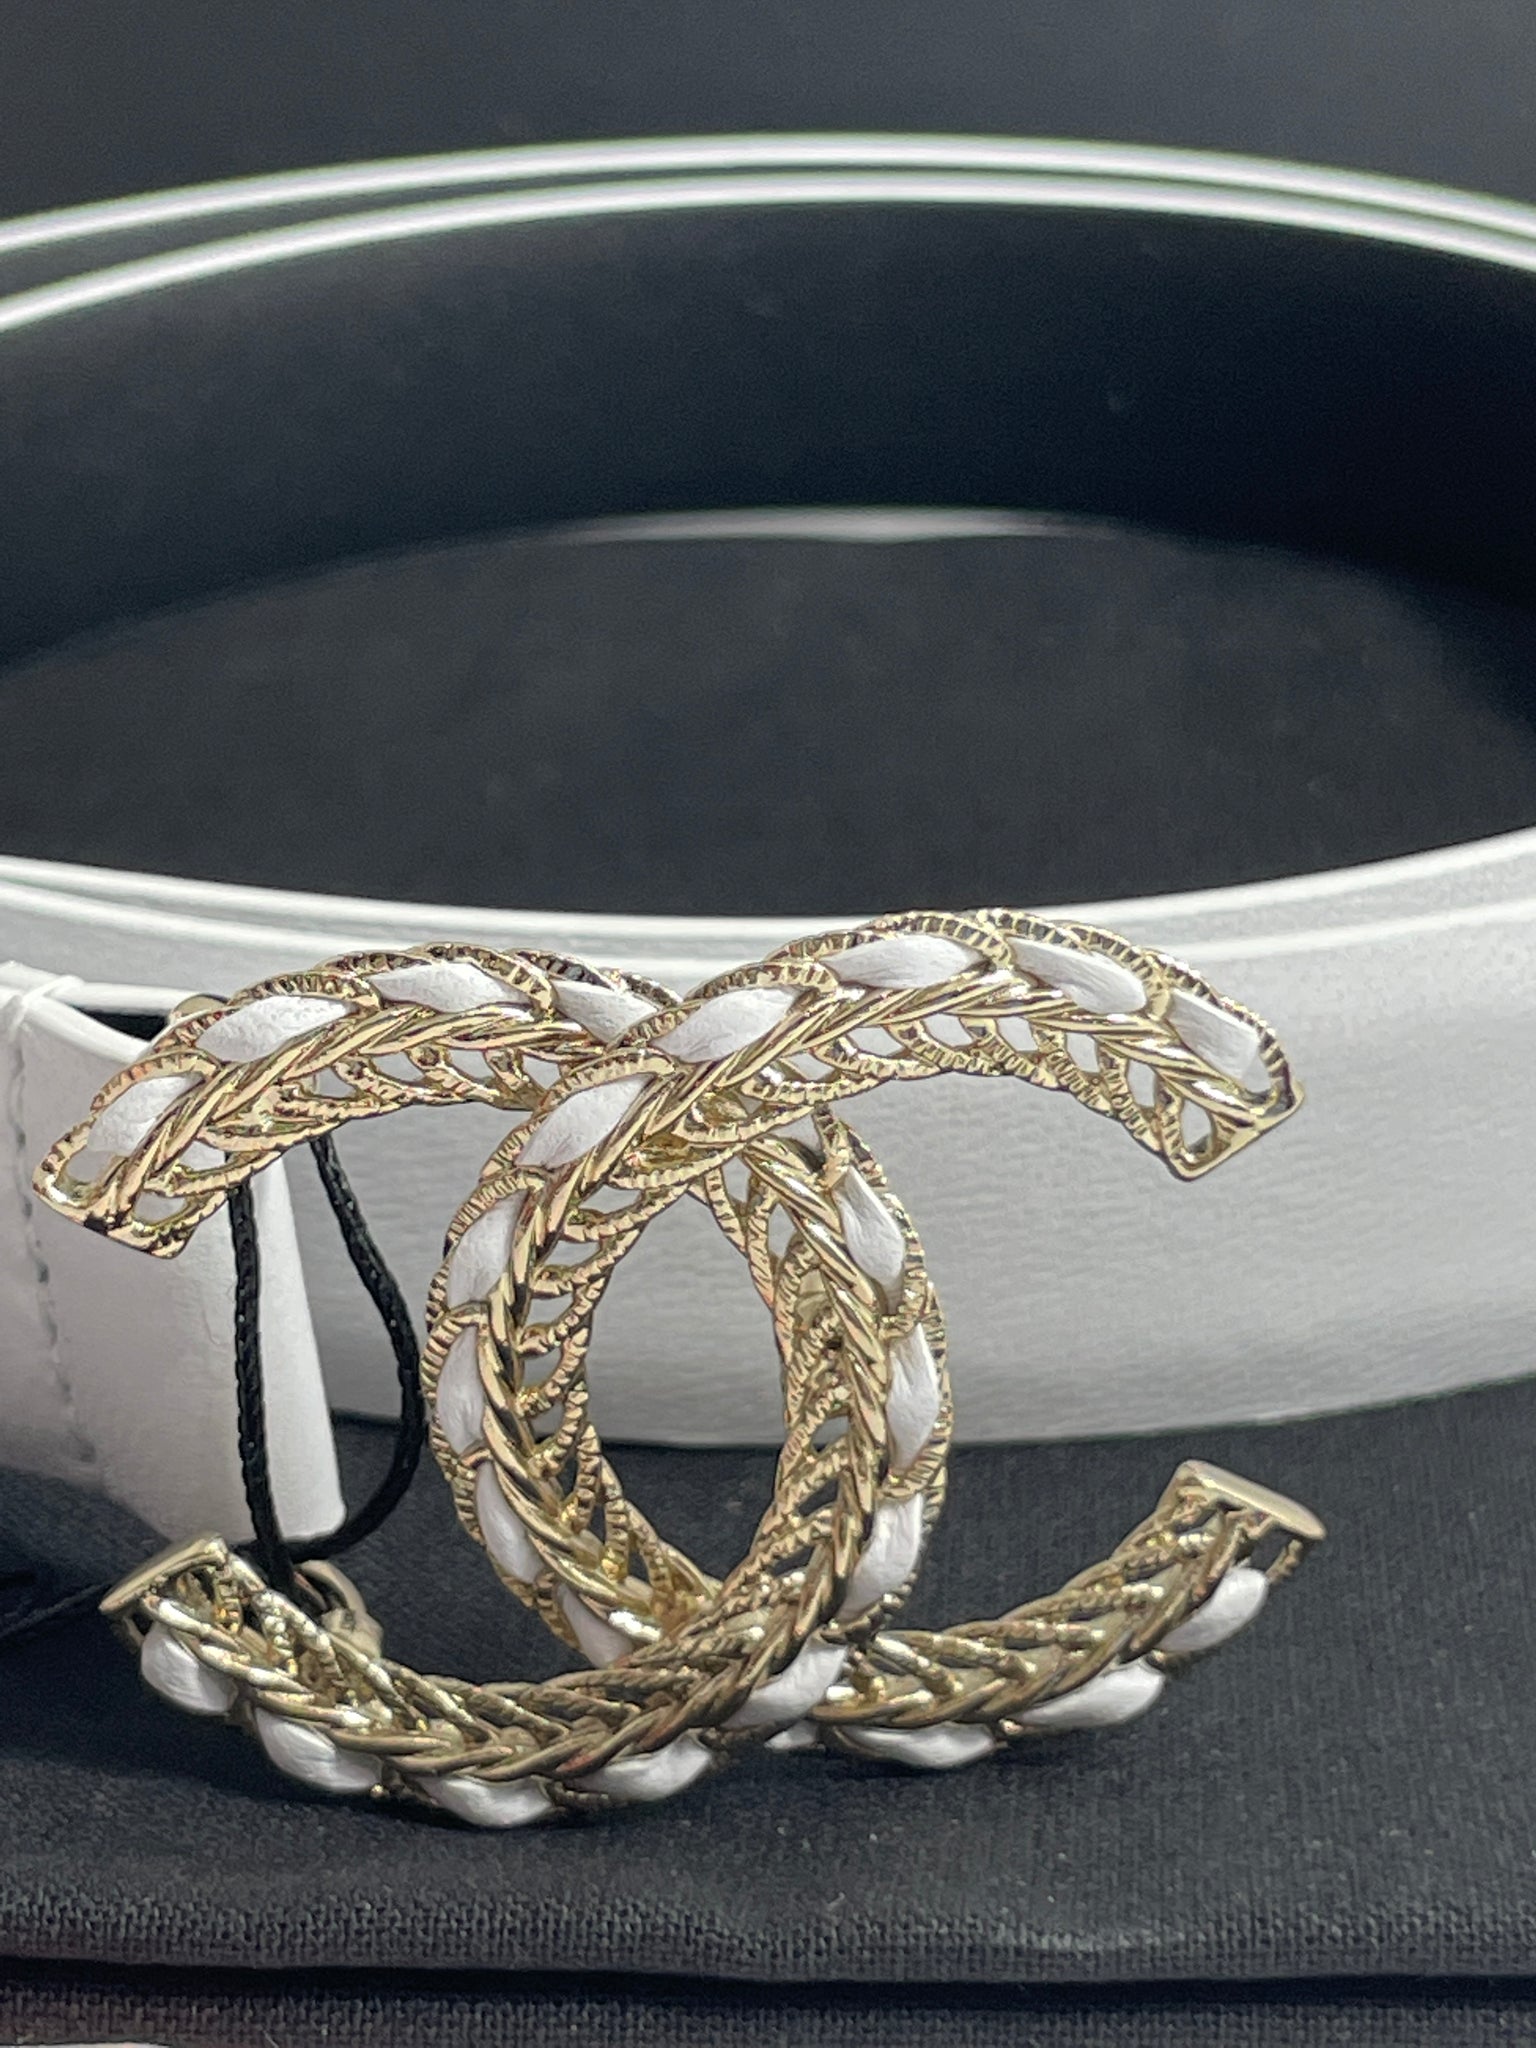 Chanel White Leather Belt With Gold White Leather Buckle – The